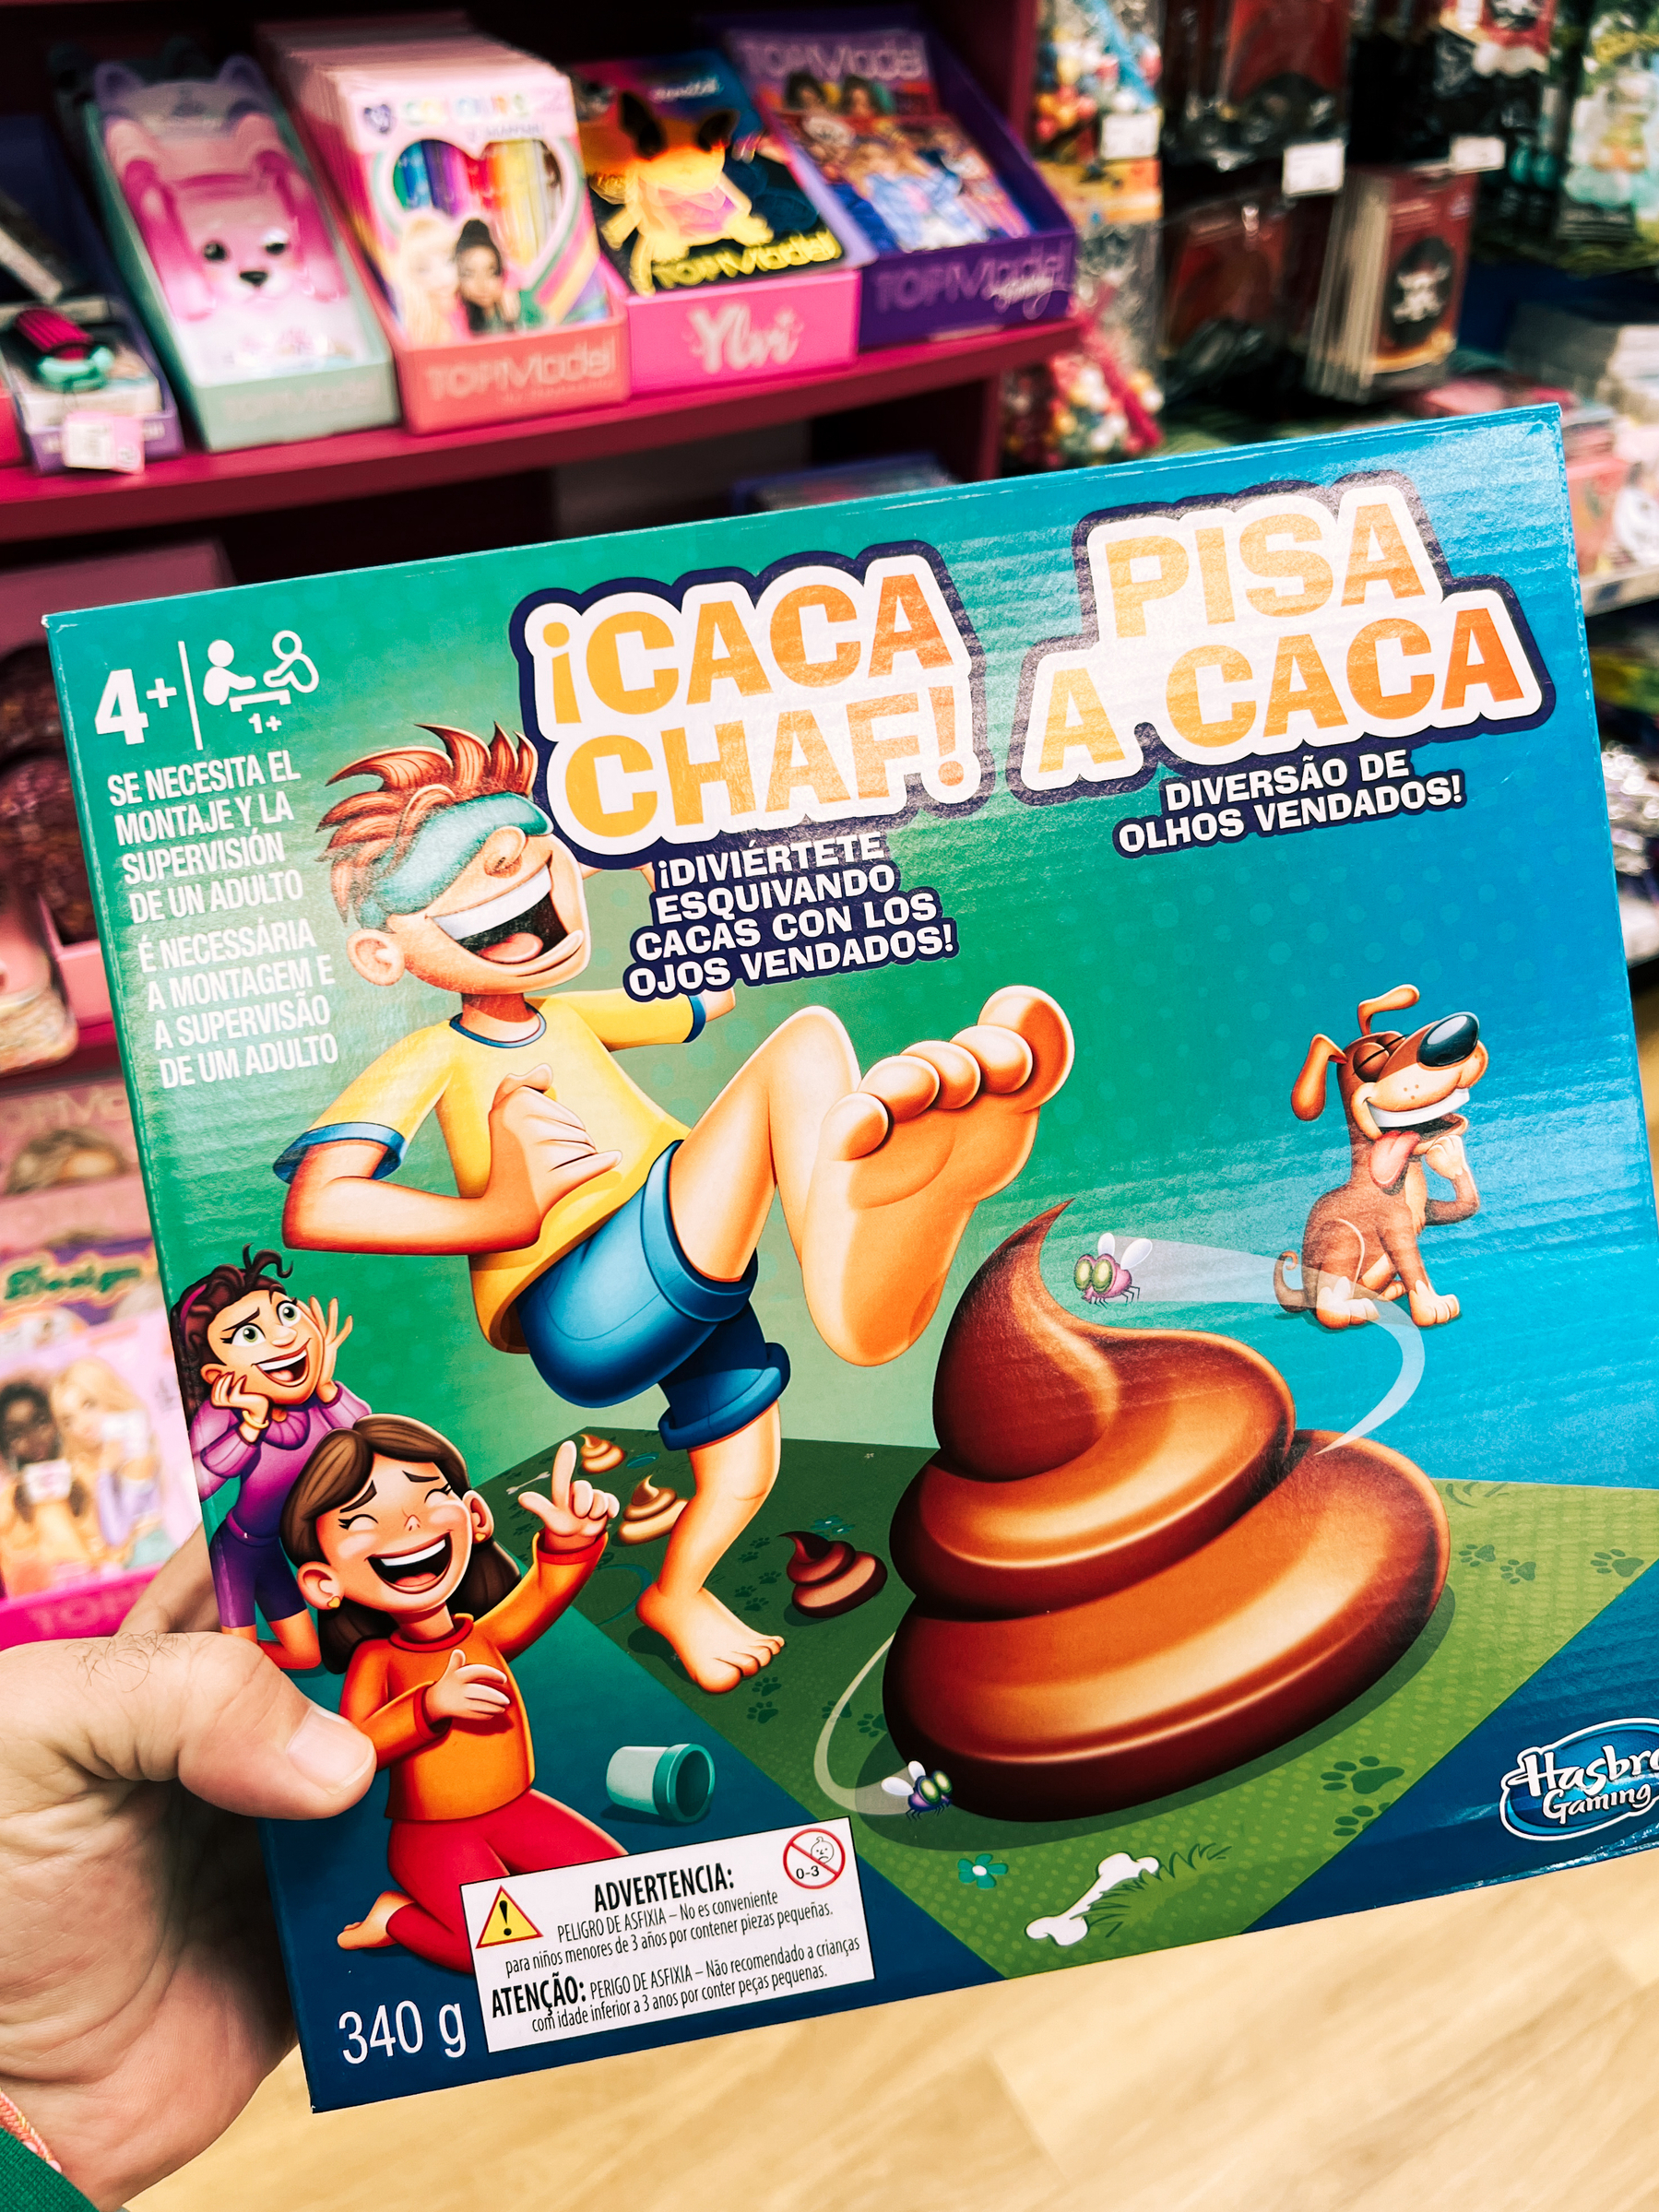 A person&rsquo;s hand holding a board game box named &ldquo;¡CACA CHAF!&rdquo; with animated images of children and a dog, and a comically large pile of poop. The game involves wearing a blindfold and avoiding stepping in fake poop.